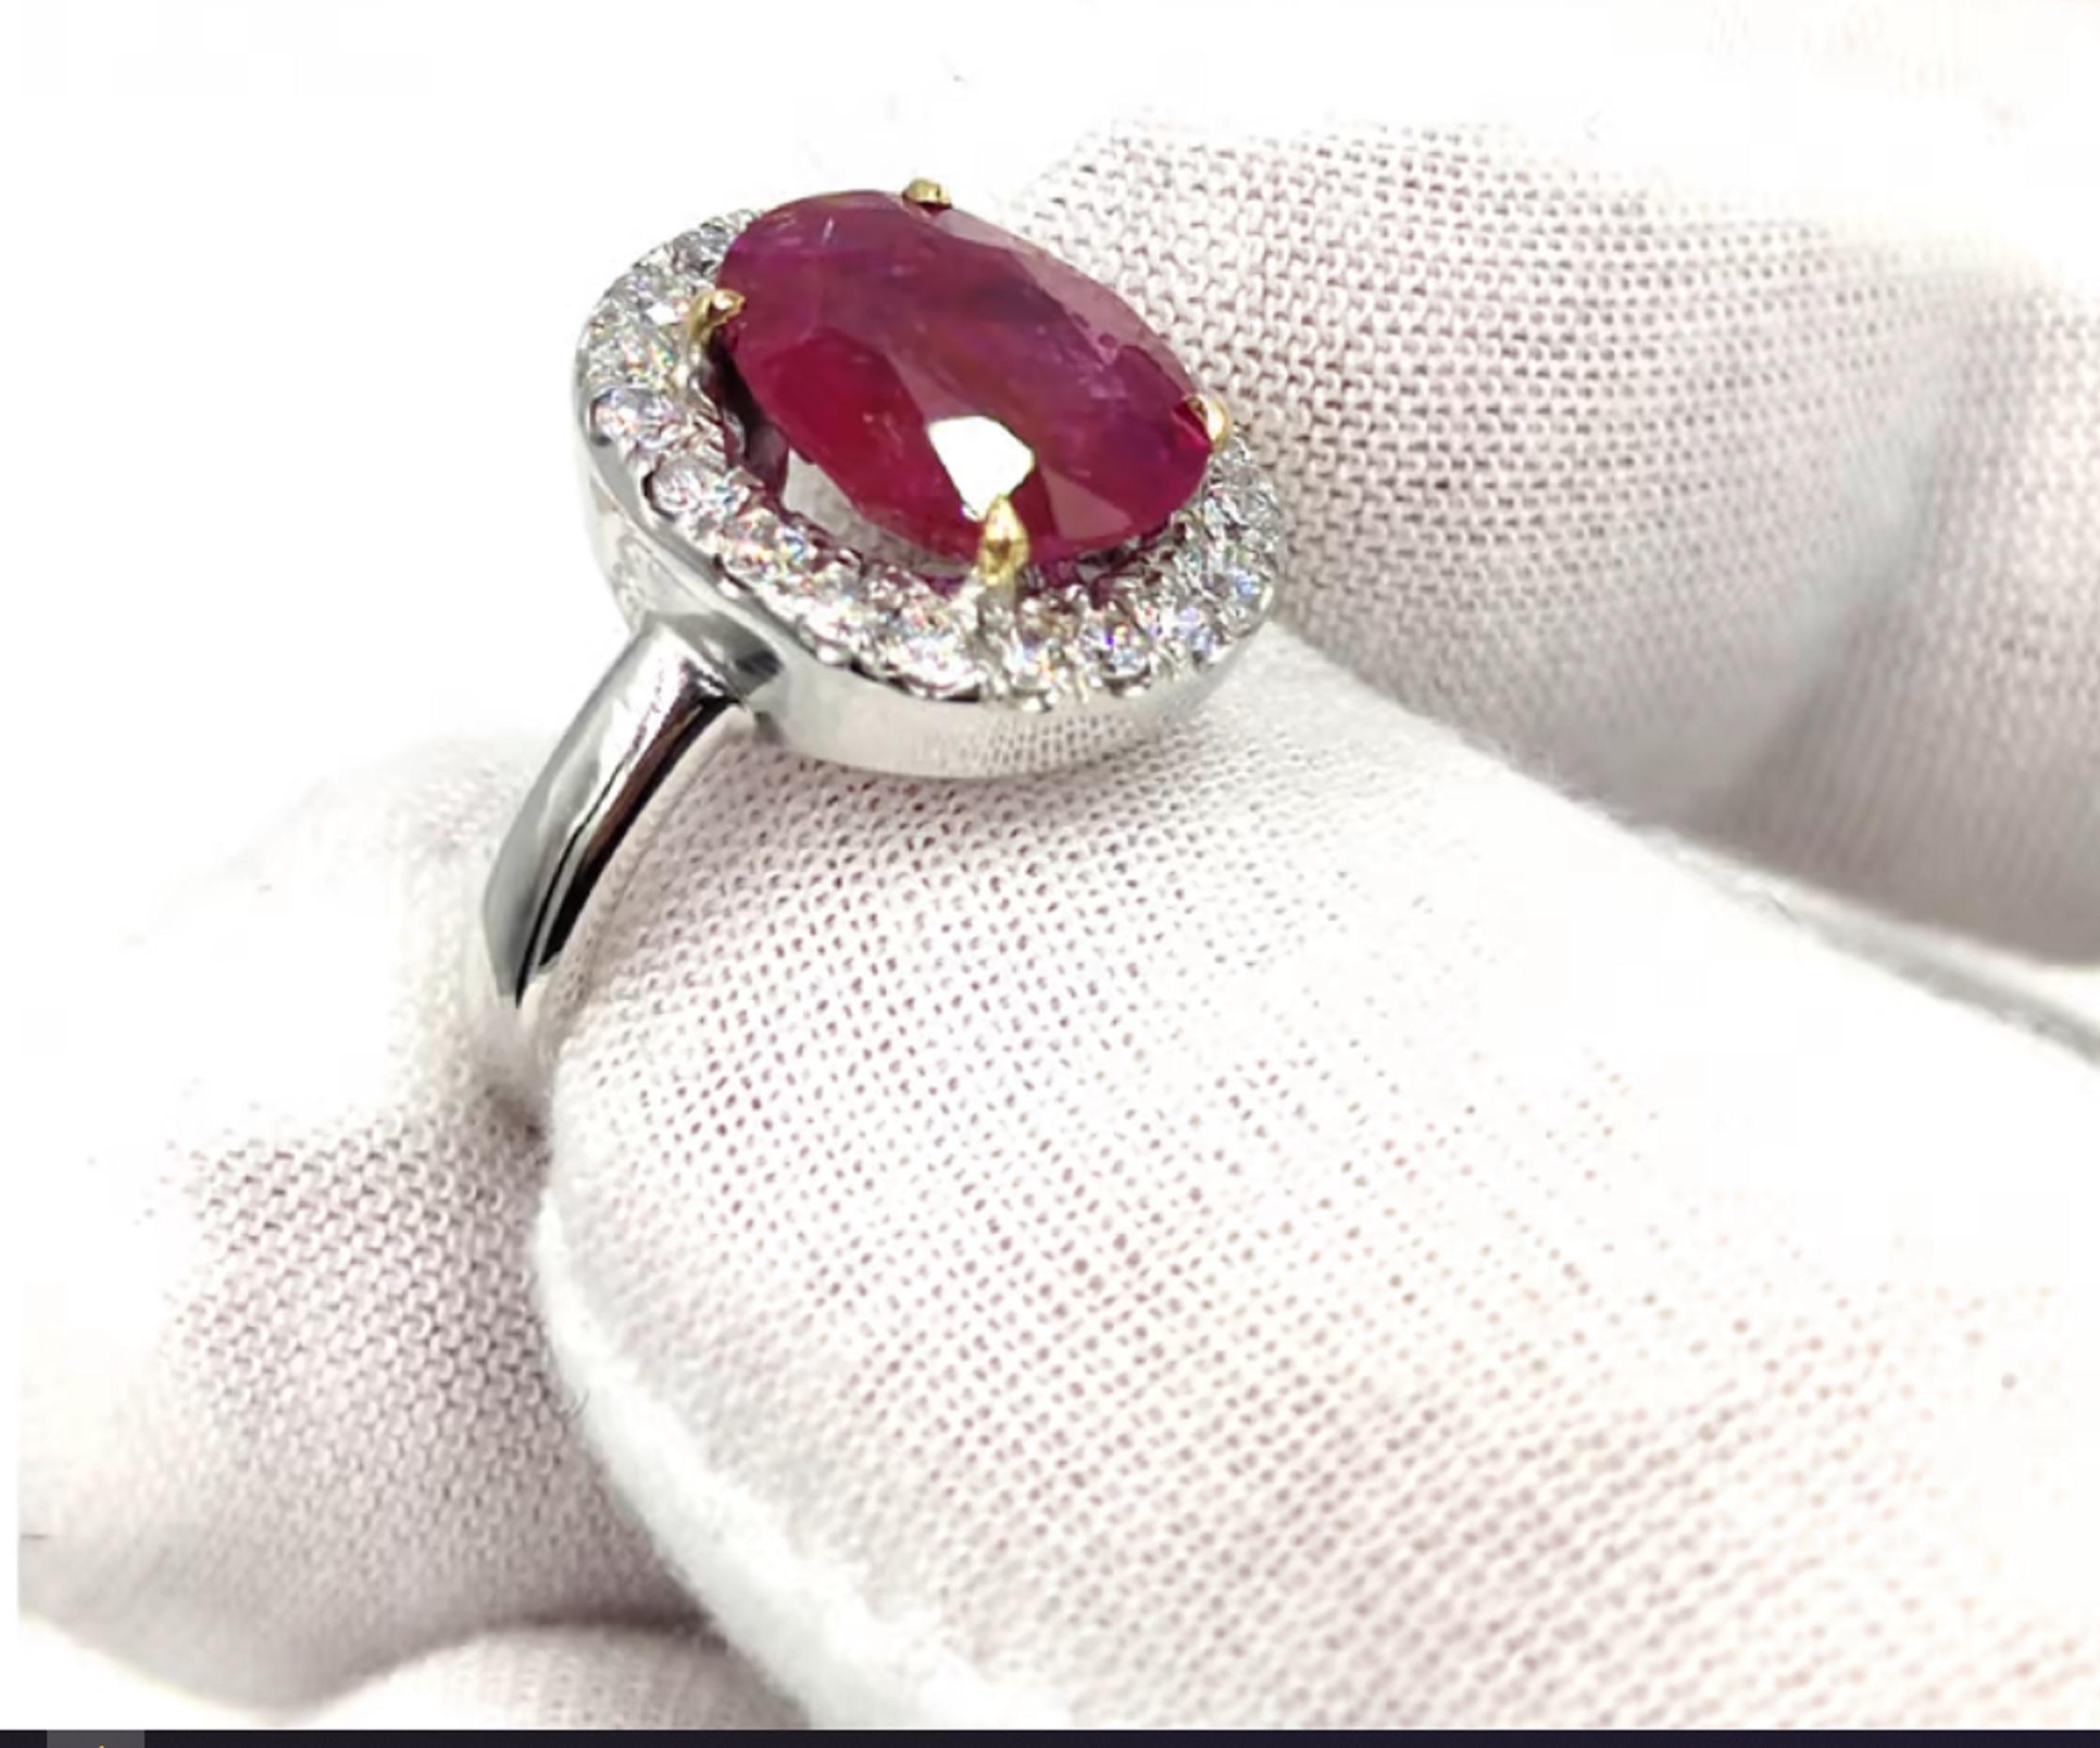 Amazing Natural 4.50 carat ruby diamond ring.

The ring is an absolute marvel and has an exquisite halo of round brilliant cut diamonds.

This ring is one of kind and considering the amazing red the ruby has it cannot be replaced.

